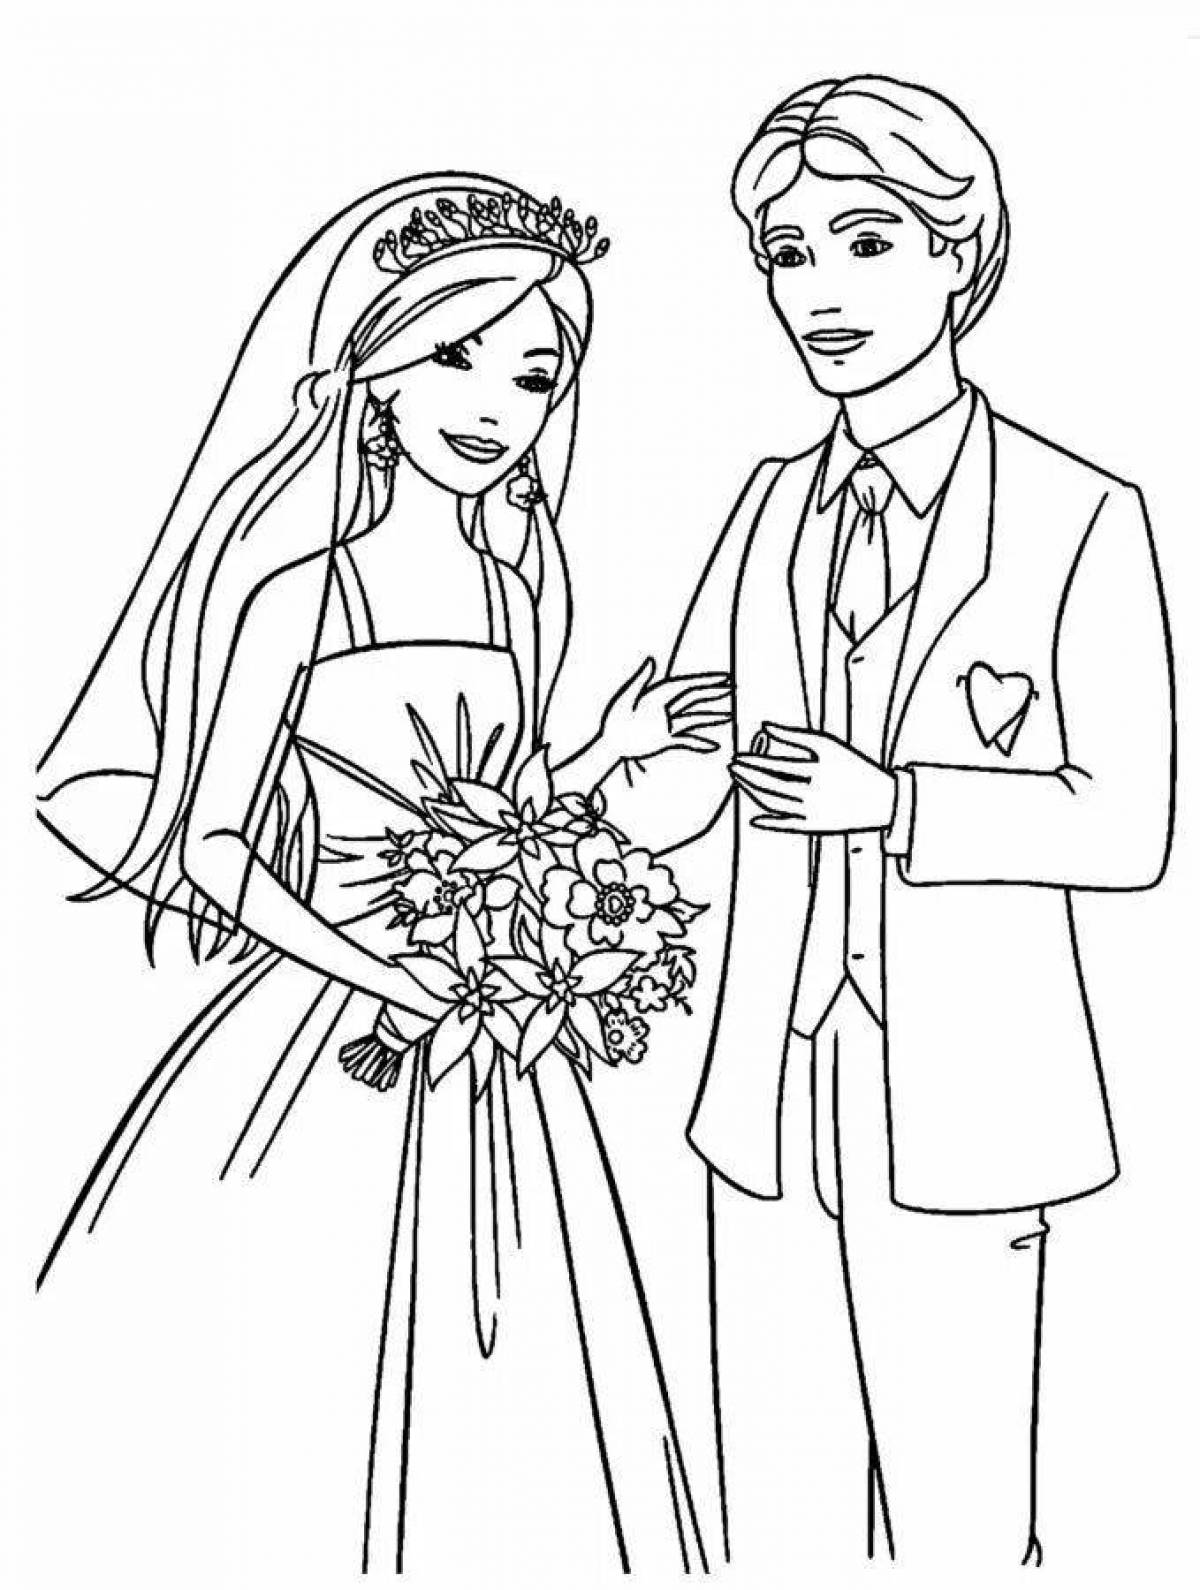 Coloring page violent wife and husband